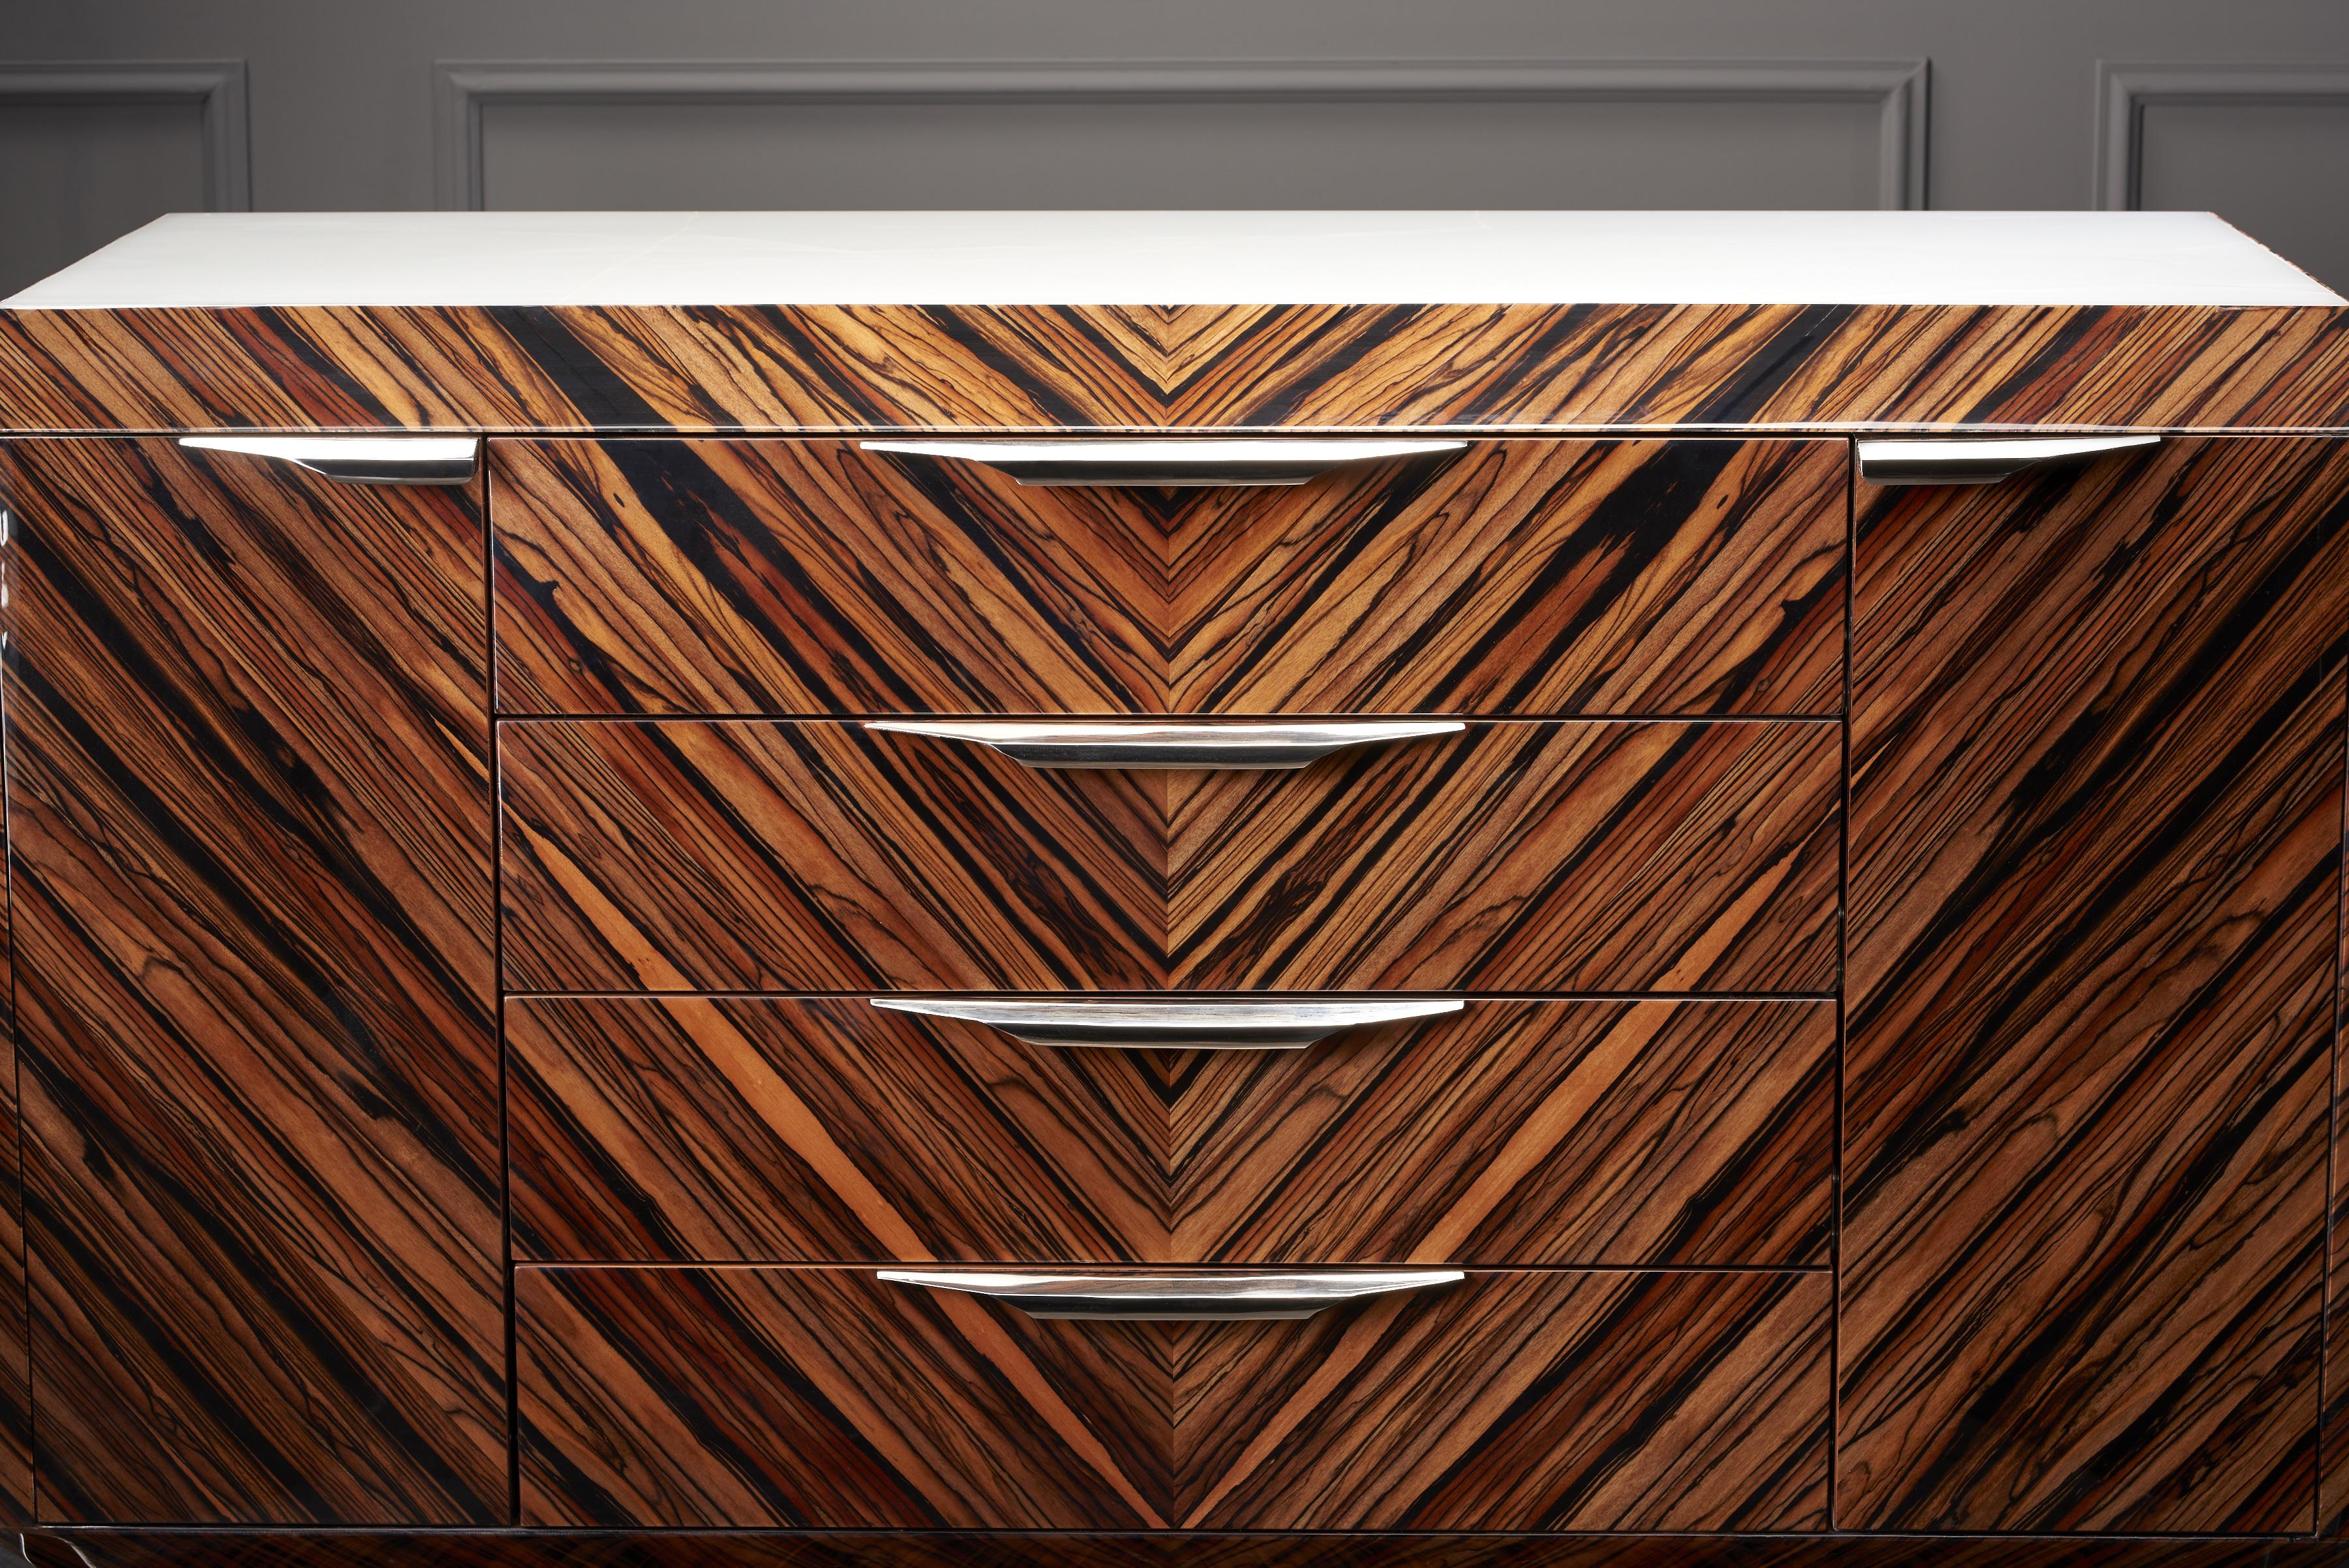 Empire small

This size of the Empire is as majestic as the large one. The Empire chest of drawers guarantees timeless beauty and exclusive quality. Its main features are the bold, geometric design and the simplified outline. It suggests firmness